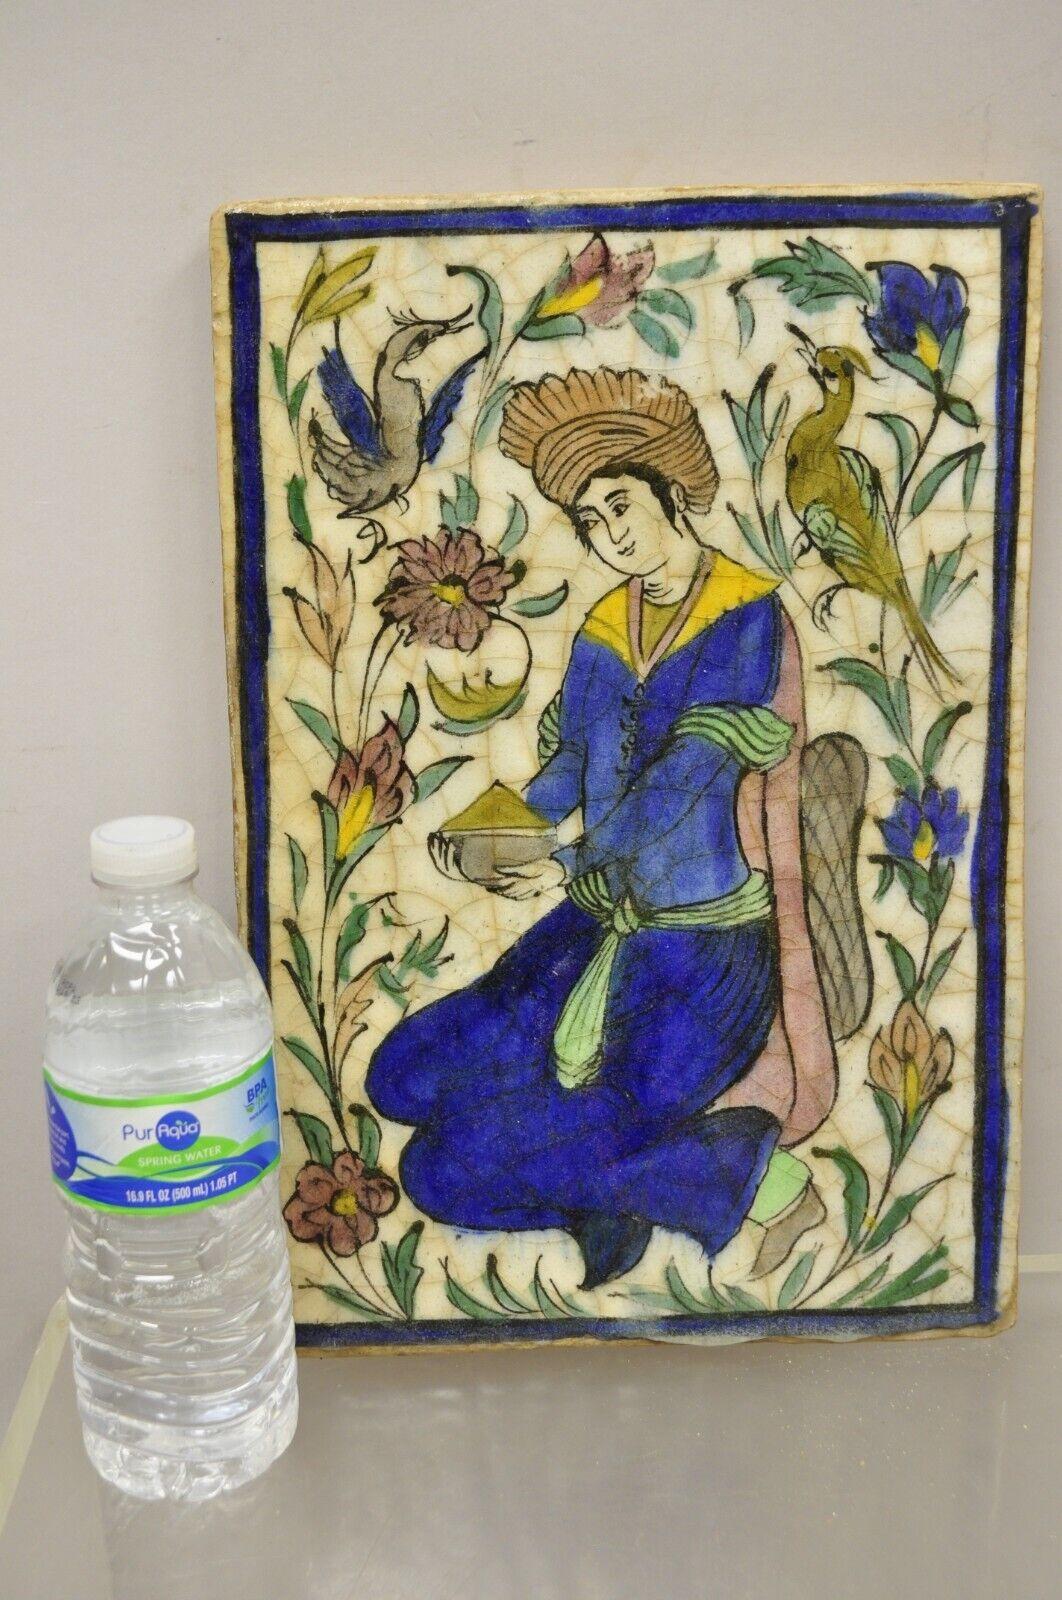 Antique Persian Iznik Qajar Style Ceramic Pottery Tile Figure with Blue Garb C2. Item features an original crackle glazed finish, heavy ceramic pottery construction, very impressive detail, wonderful style and form. Great to mount as wall art or